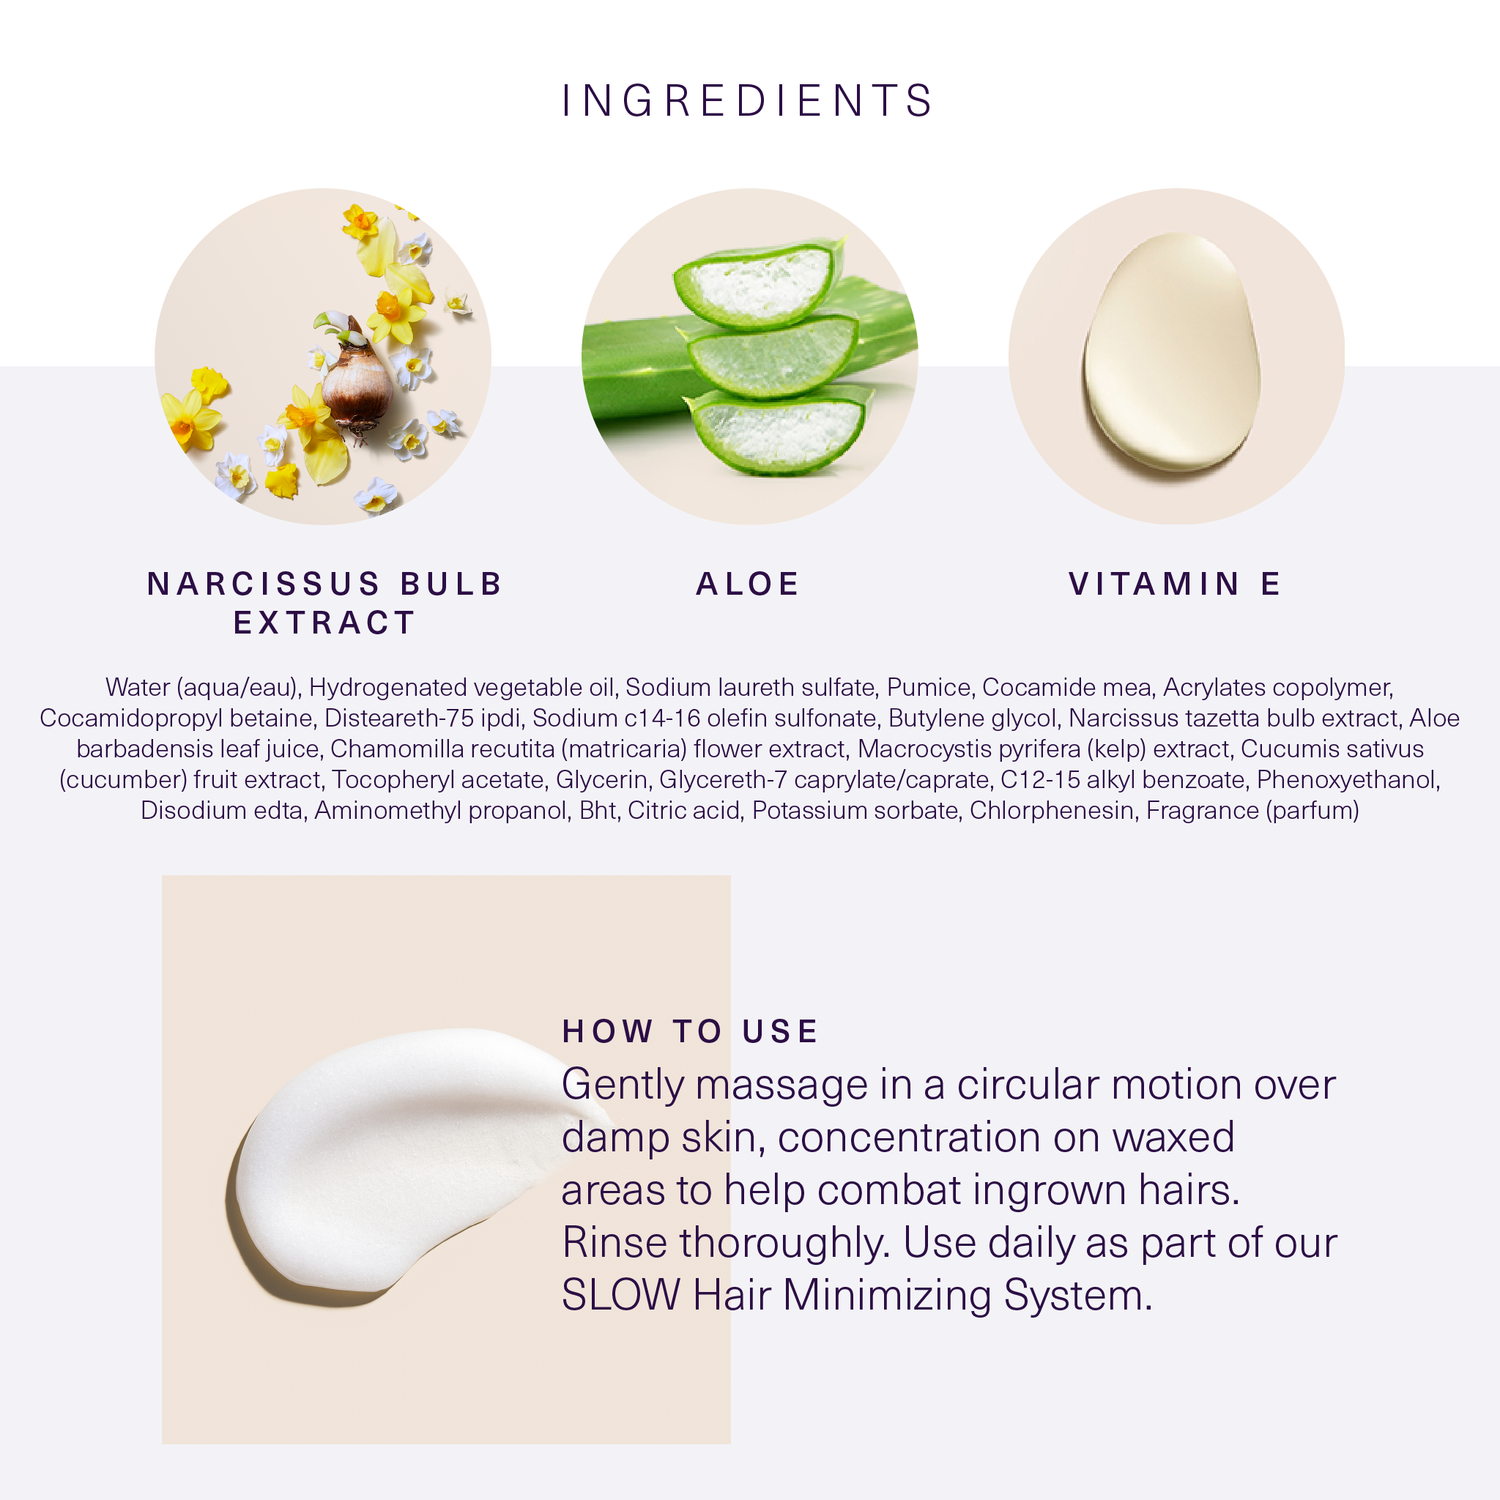 Ingredients and how to use European Wax Center Aloe Body Polish with images of narcissus bulb extract, aloe, and vitamin E on white and light gray background